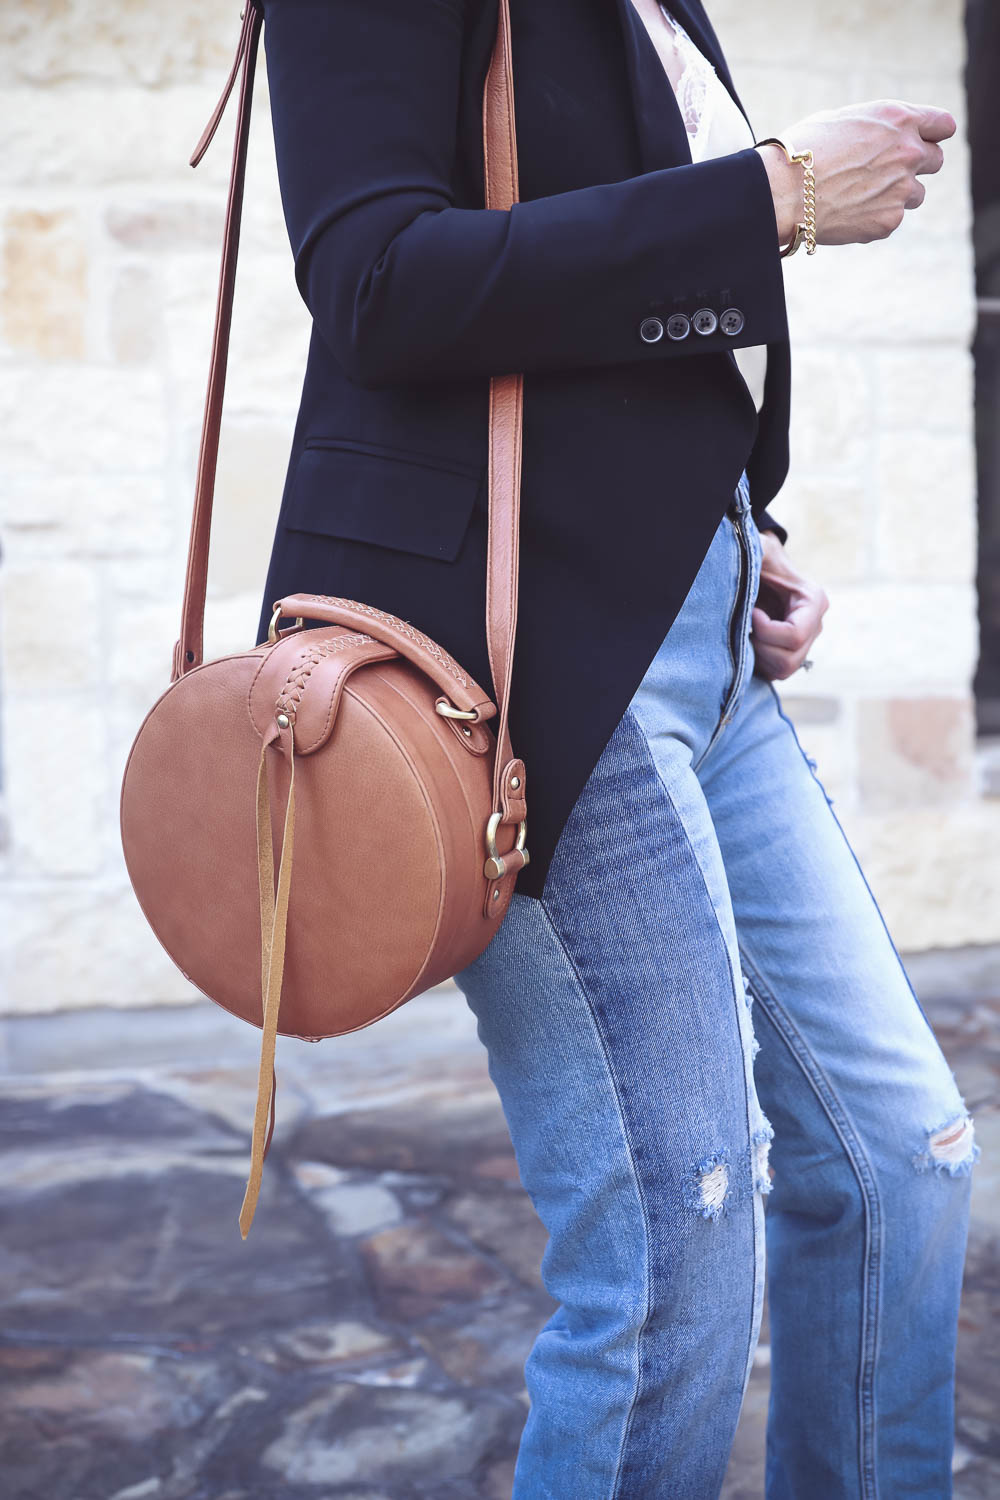 Round Handbags, hot accessories fashion trends fall 2017, including round bags, edit by fashion blogger over 40, Erin Busbee of Busbee Style